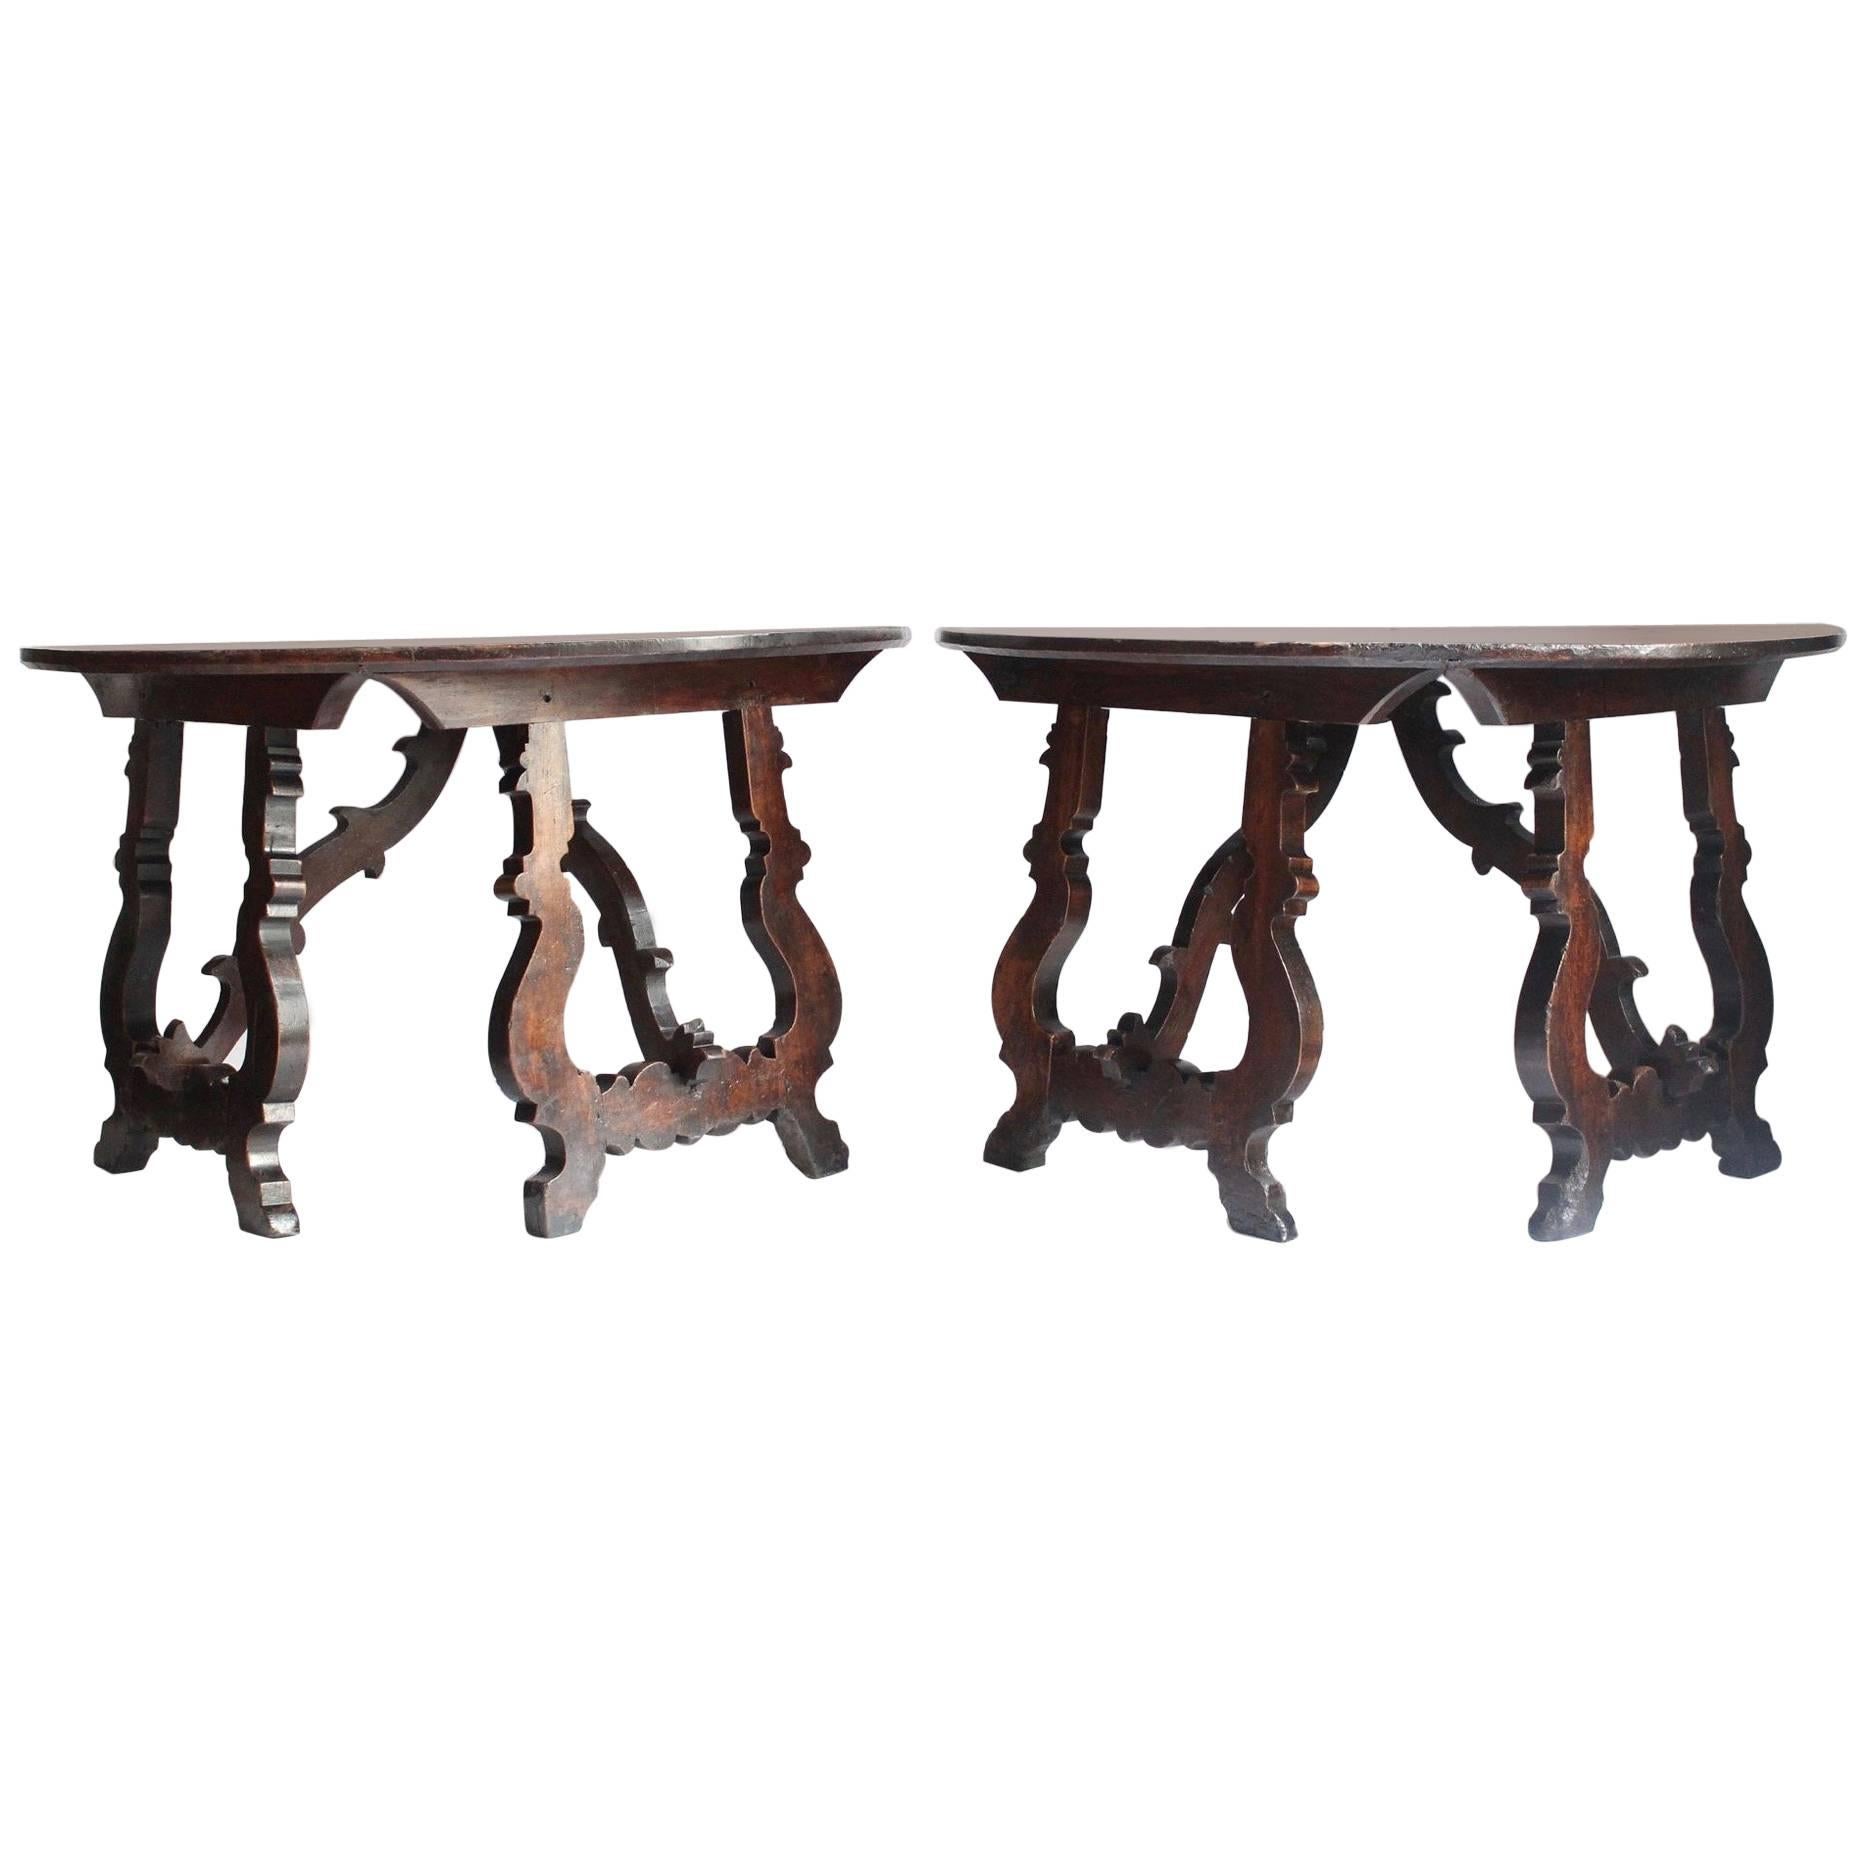 Pair of Walnut Demilune Console Tables, Italy, Tuscany, 17th Century For Sale